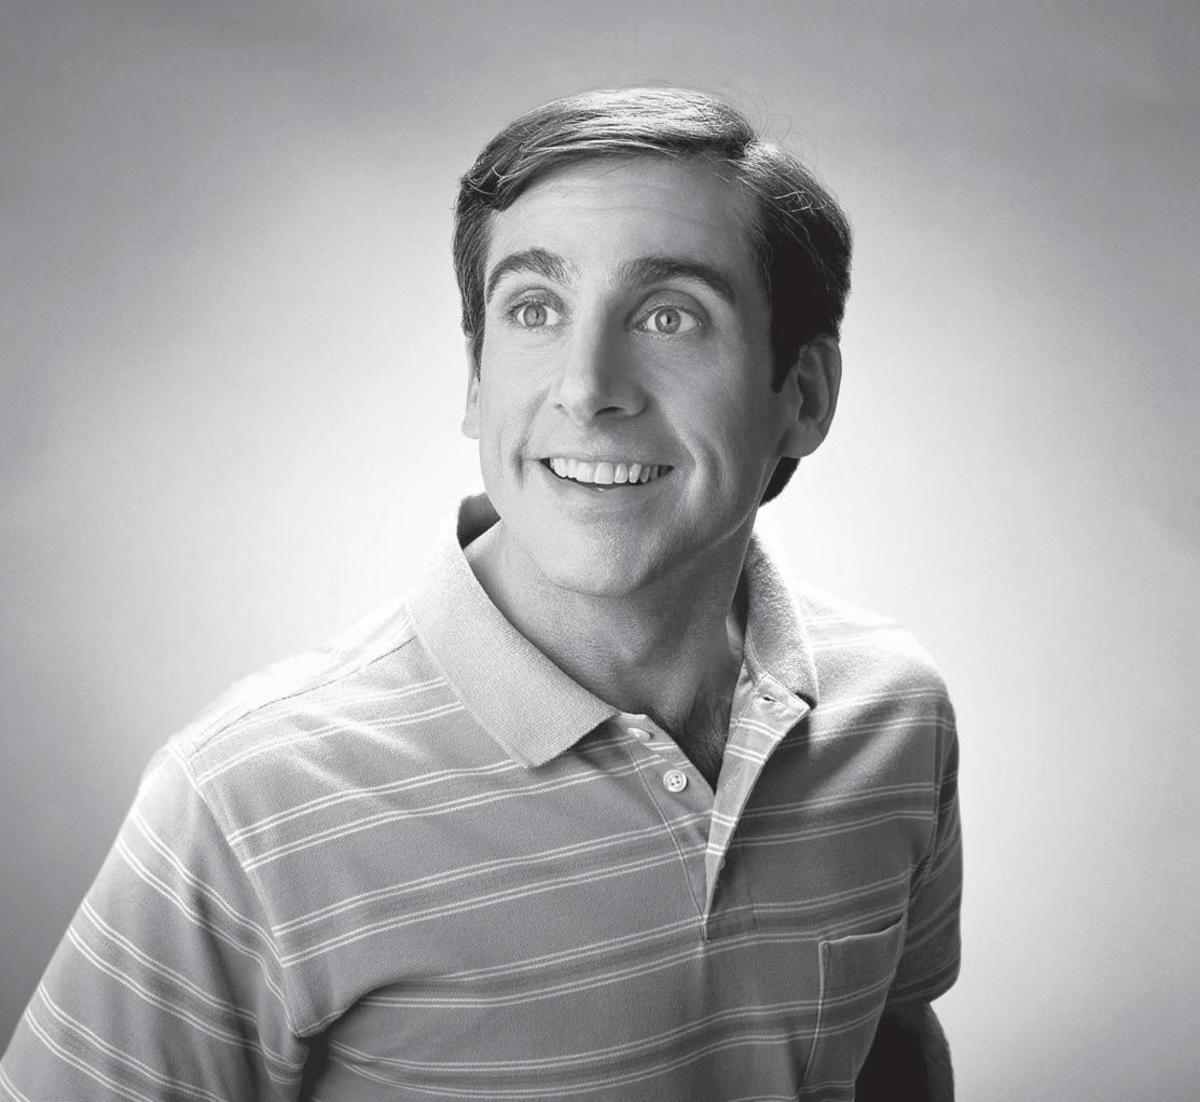  Steve Carell as Andy Stitzer in The 40 Year-Old Virgin, written by Judd Apatow & Steve Carell. PHOTO: Art Streiber